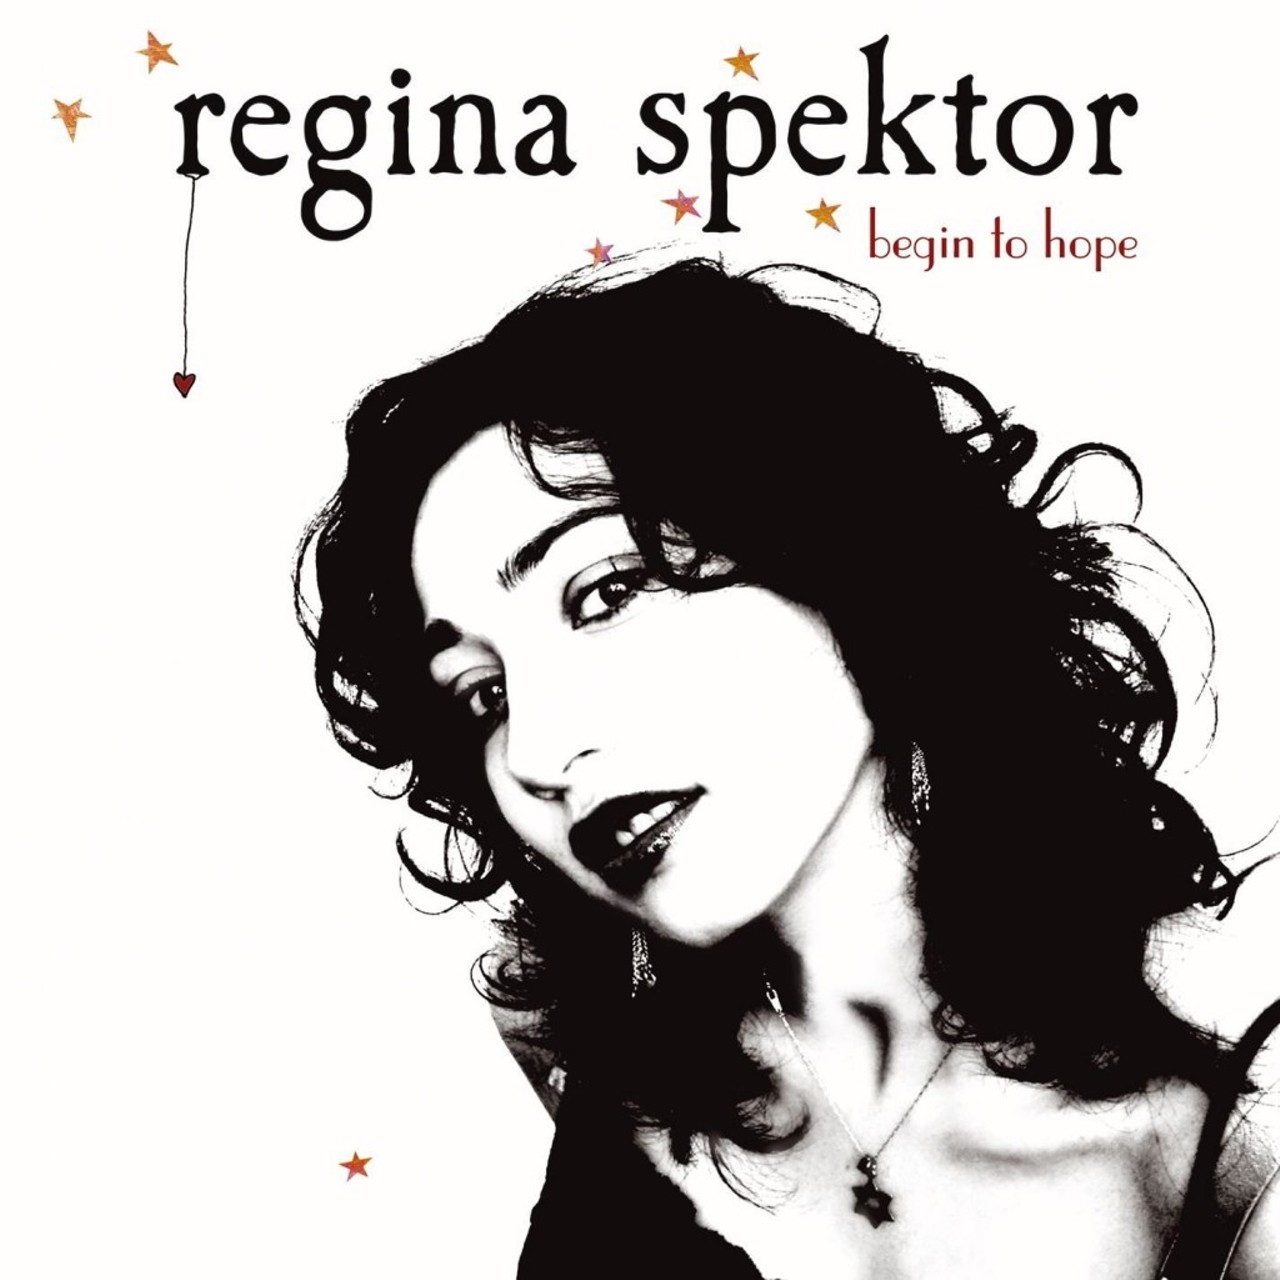 Regina Spektor - Begin to Hope
The Russian redhead sheds some of the avant-garde noise heard on debut Soviet Kitsch and explores equally uplifting and heartbreaking territory. An official Record Store Day (RSD) release, Begin to Hope will be released on two LPs, limited to 3,000 copies.
Via amazon.com